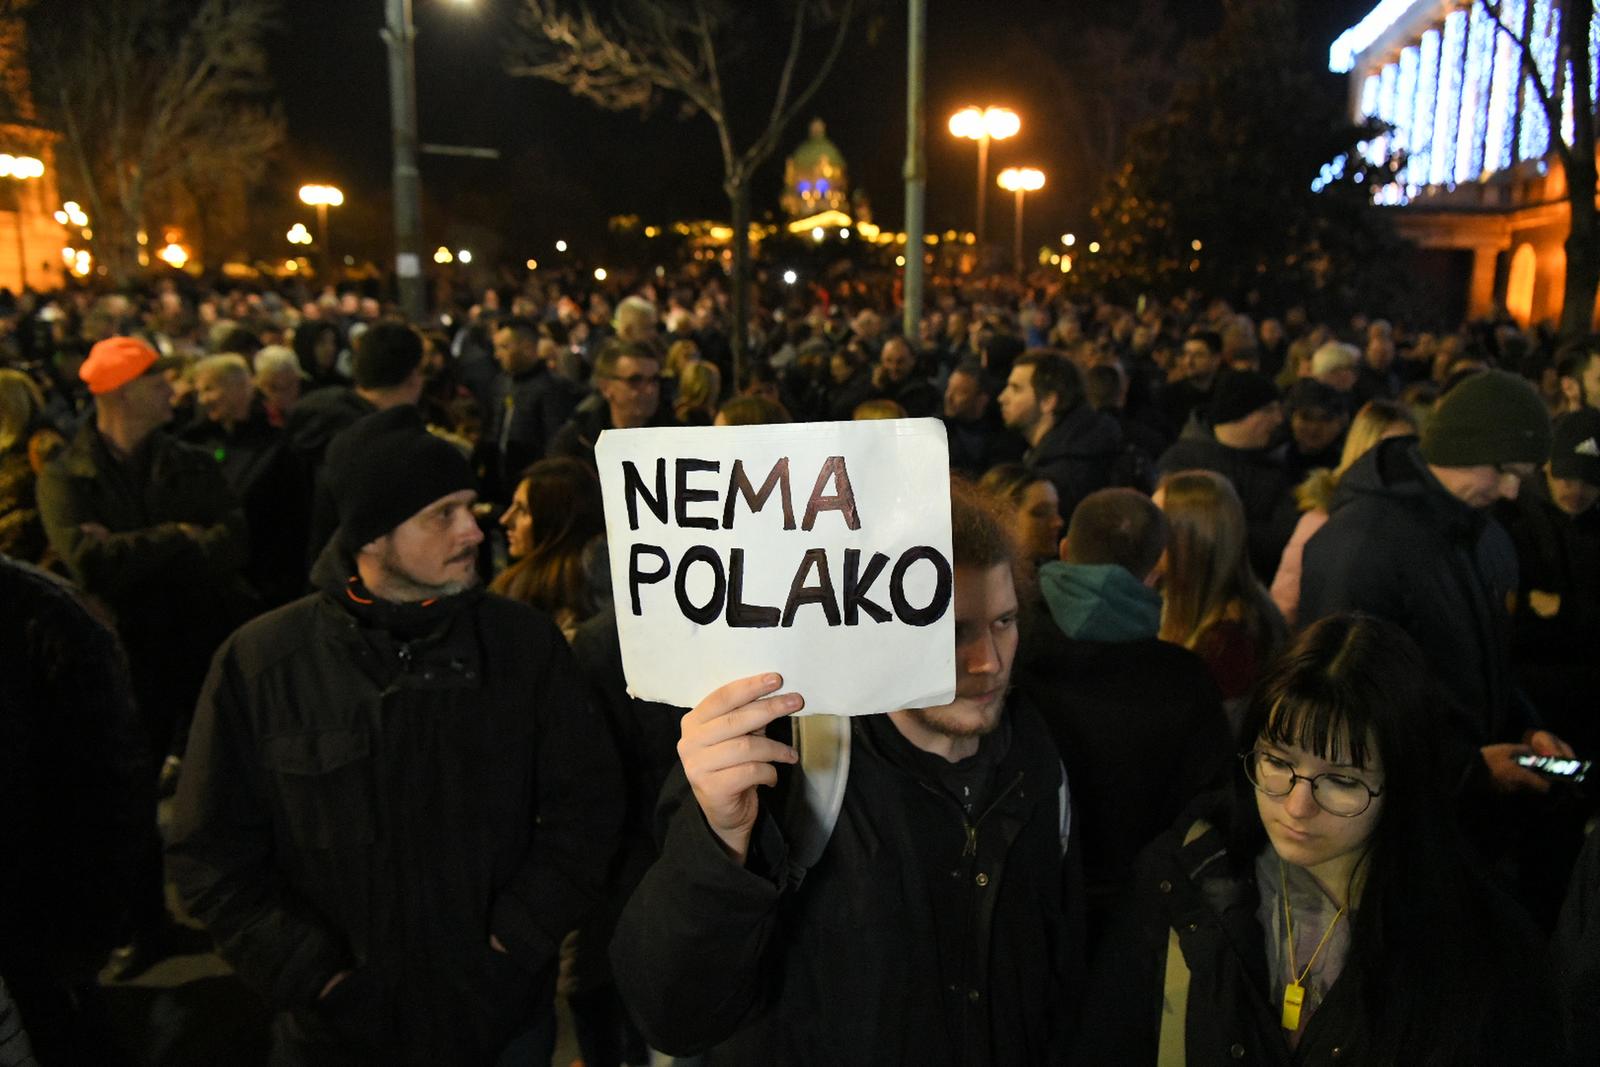 24, December, 2023, Belgrade - The seventh protest organized by the "Serbia against violence" coalition was held in front of the seat of the Republican Election Commission due to the "stealing of the citizens' electoral will". . Photo: A. H./ATAImages.

24, decembar, 2023, Beograd - Ispred sedista Republicke izborne komisije odrzan je sedmi protest koji je organizovala koalicija "Srbija protiv nasilja" zbog "kradje izborne volje gradjana". . Photo: A. H./ATAImages. Photo: Milos Tesic/ATAImages/PIXSELL